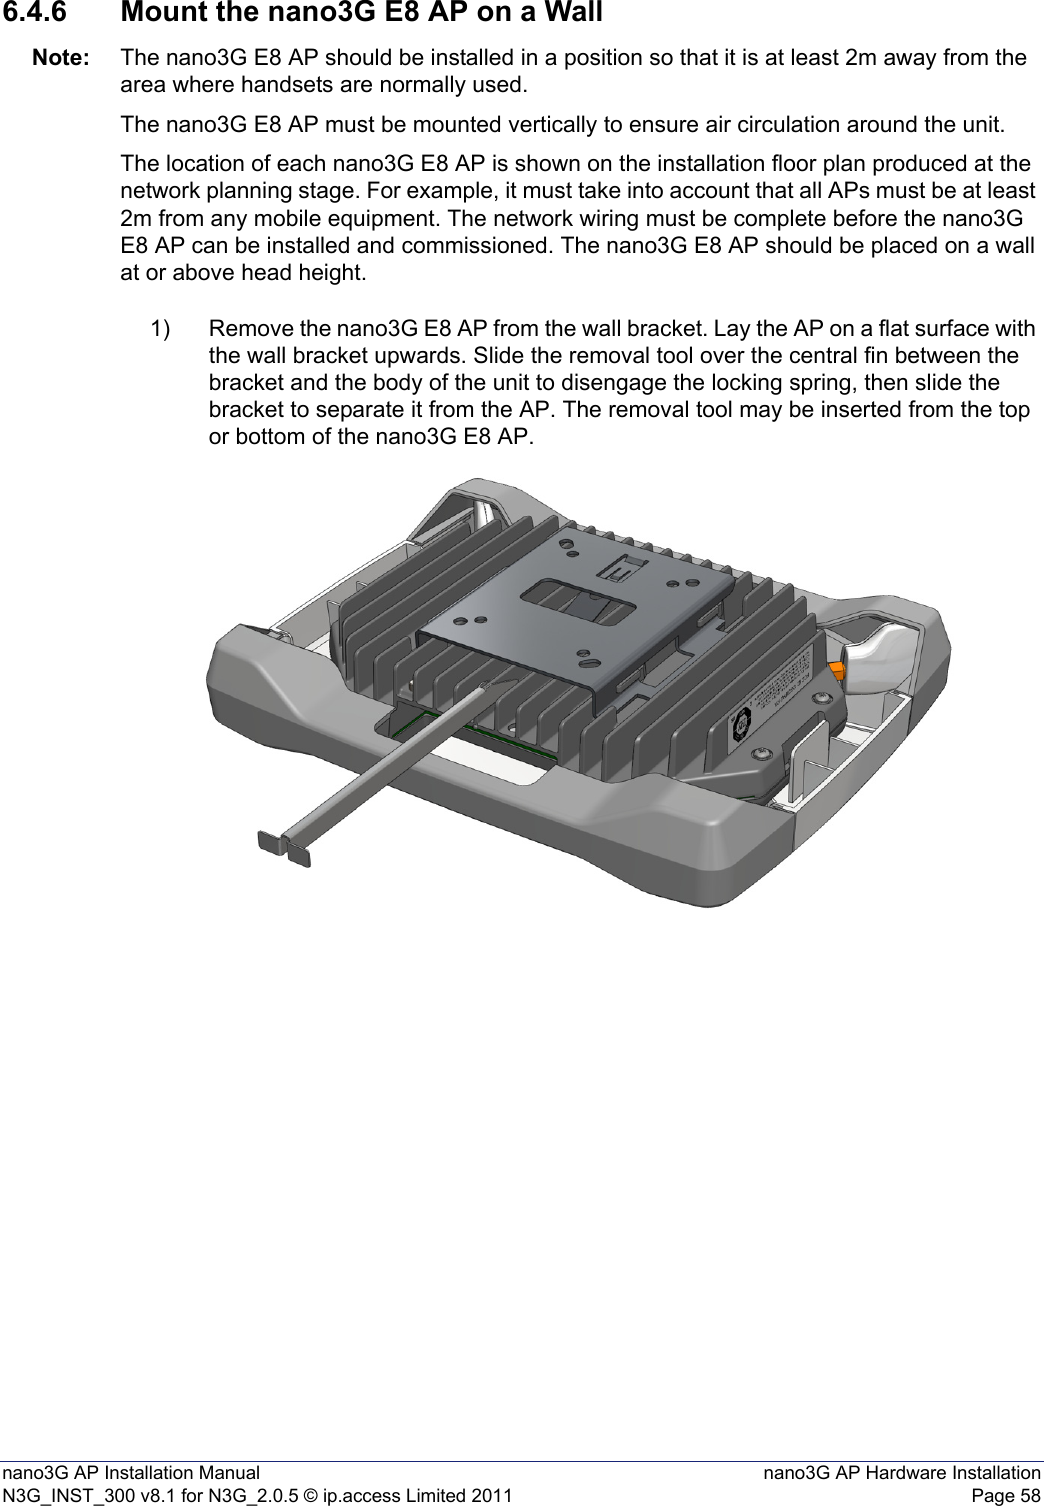 nano3G AP Installation Manual nano3G AP Hardware InstallationN3G_INST_300 v8.1 for N3G_2.0.5 © ip.access Limited 2011 Page 586.4.6 Mount the nano3G E8 AP on a WallNote: The nano3G E8 AP should be installed in a position so that it is at least 2m away from the area where handsets are normally used.The nano3G E8 AP must be mounted vertically to ensure air circulation around the unit.The location of each nano3G E8 AP is shown on the installation floor plan produced at the network planning stage. For example, it must take into account that all APs must be at least 2m from any mobile equipment. The network wiring must be complete before the nano3G E8 AP can be installed and commissioned. The nano3G E8 AP should be placed on a wall at or above head height.1) Remove the nano3G E8 AP from the wall bracket. Lay the AP on a flat surface with the wall bracket upwards. Slide the removal tool over the central fin between the bracket and the body of the unit to disengage the locking spring, then slide the bracket to separate it from the AP. The removal tool may be inserted from the top or bottom of the nano3G E8 AP.